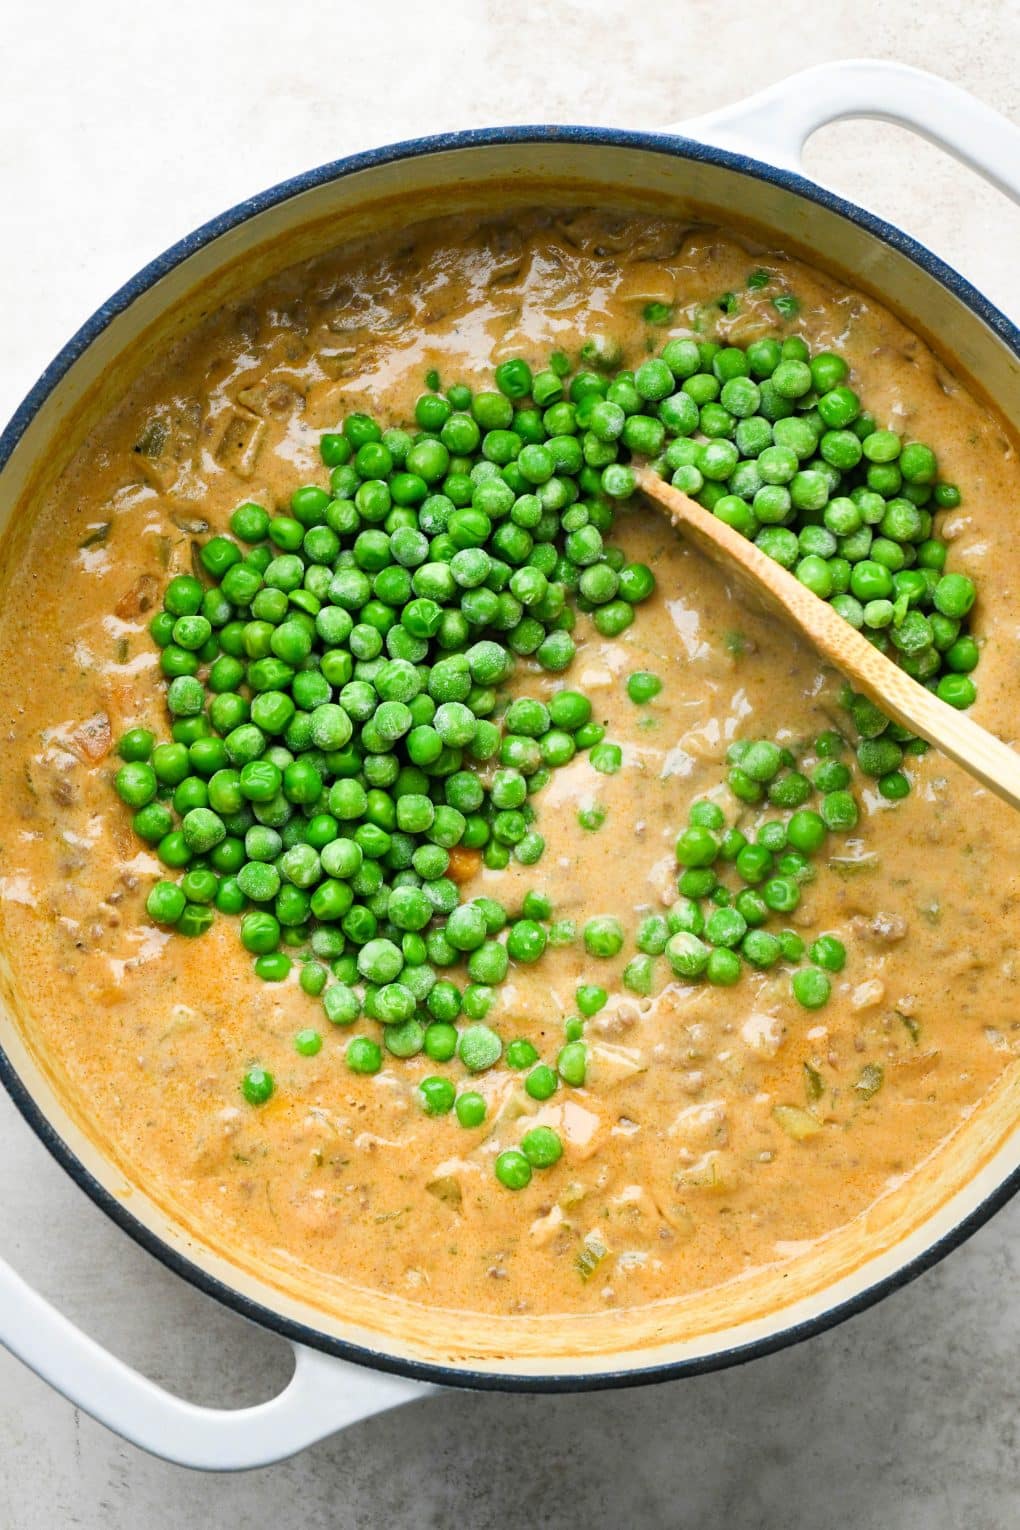 How to make shepherds pie soup: Stirring frozen peas into the soup.